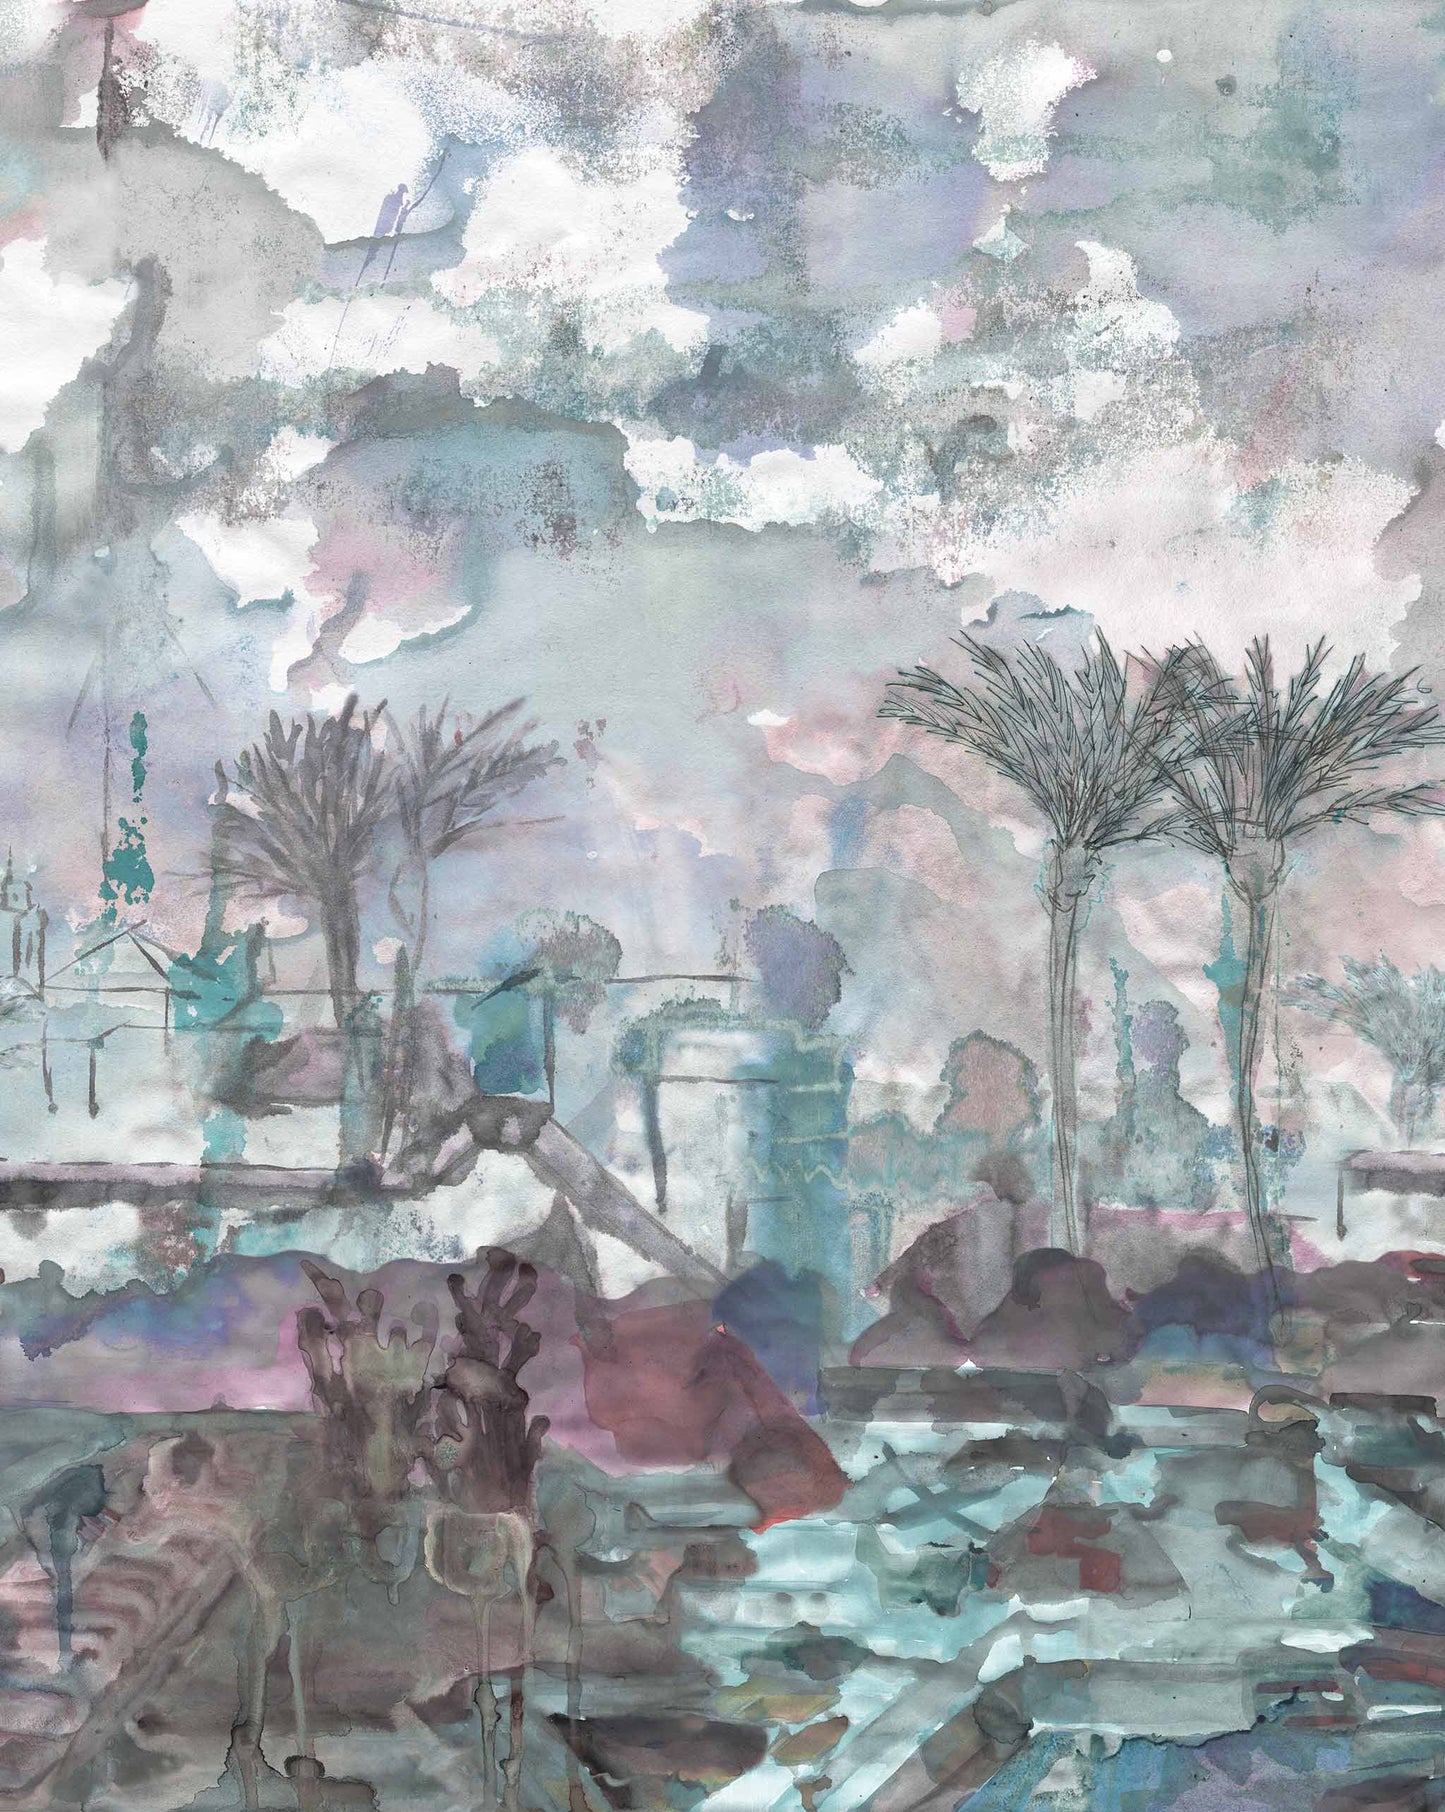 Abstract watercolor painting depicting a serene landscape with indistinct features, blending shades of blues, greys, and pinks in jewel tones, with vague tree silhouettes.<Product Name: Palmeraie Wallpaper Mural||Tesoro>